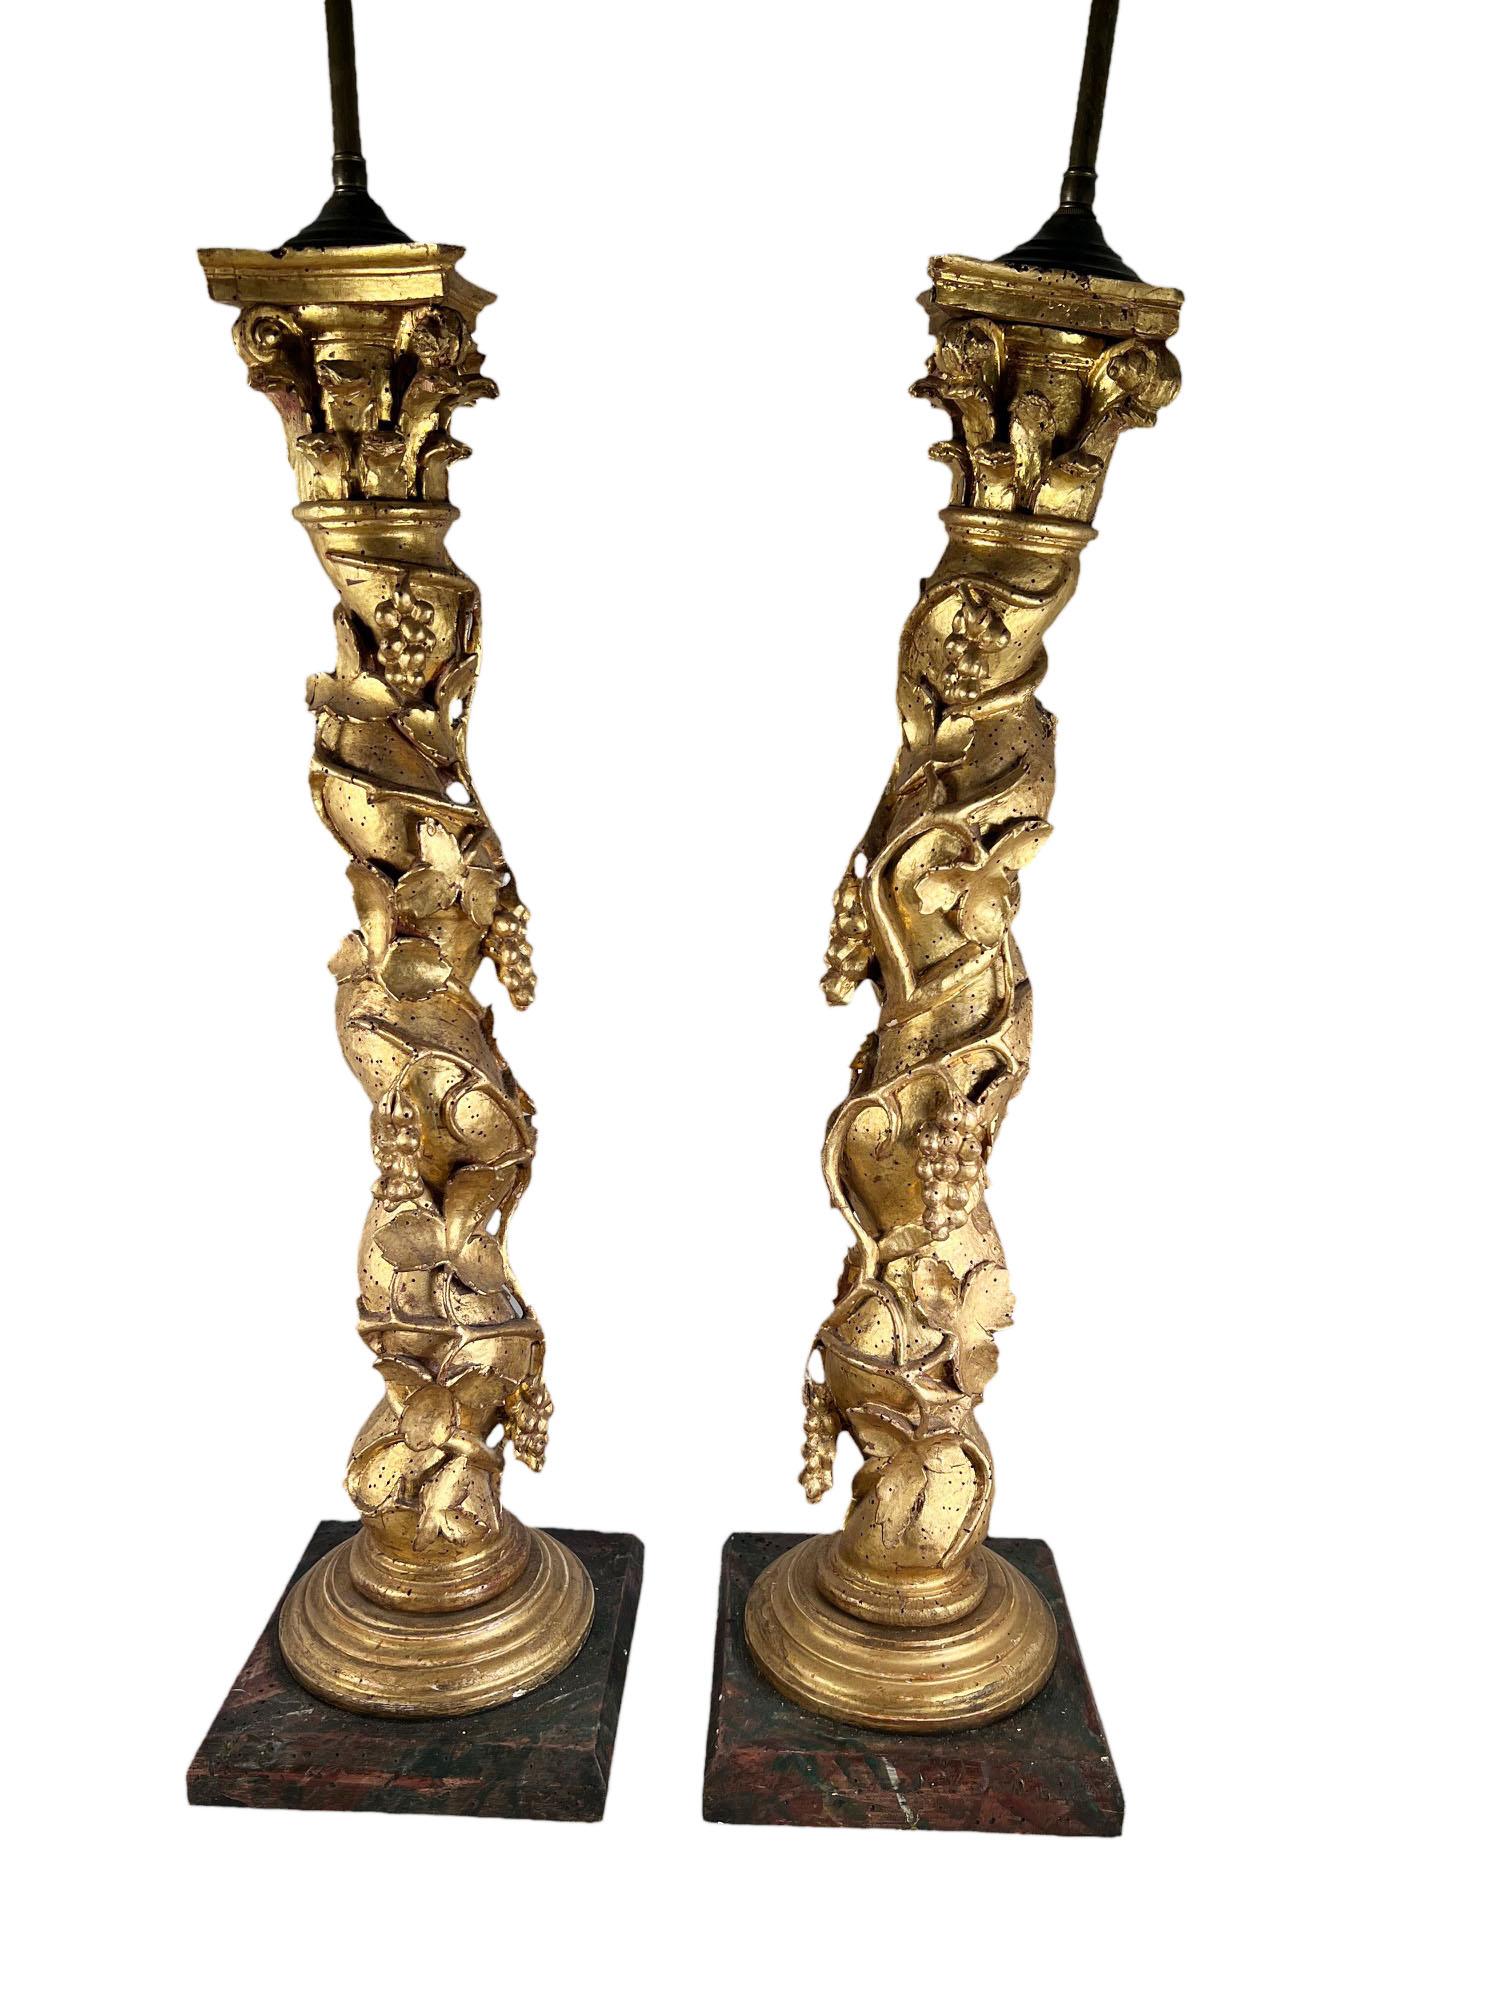 A pair of 18th century Italian Solomonic gilded columns with fruit and vines carved surround. The columns are circa 1780 and themselves are twenty seven inches long.
